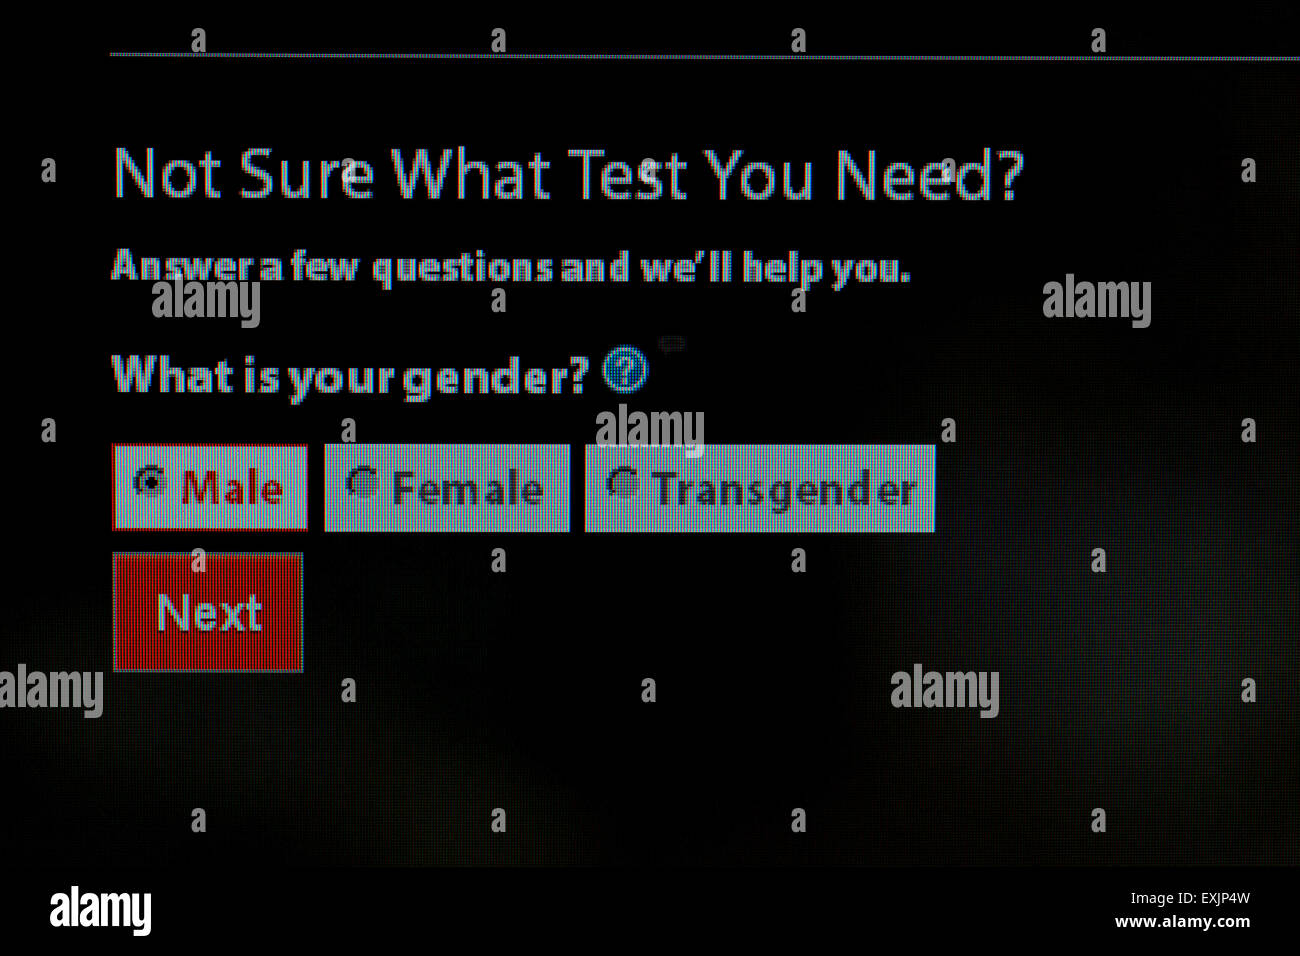 Gender selection of male, female, and transgender, on HIV / STD testing information on Centers for Disease Control Stock Photo